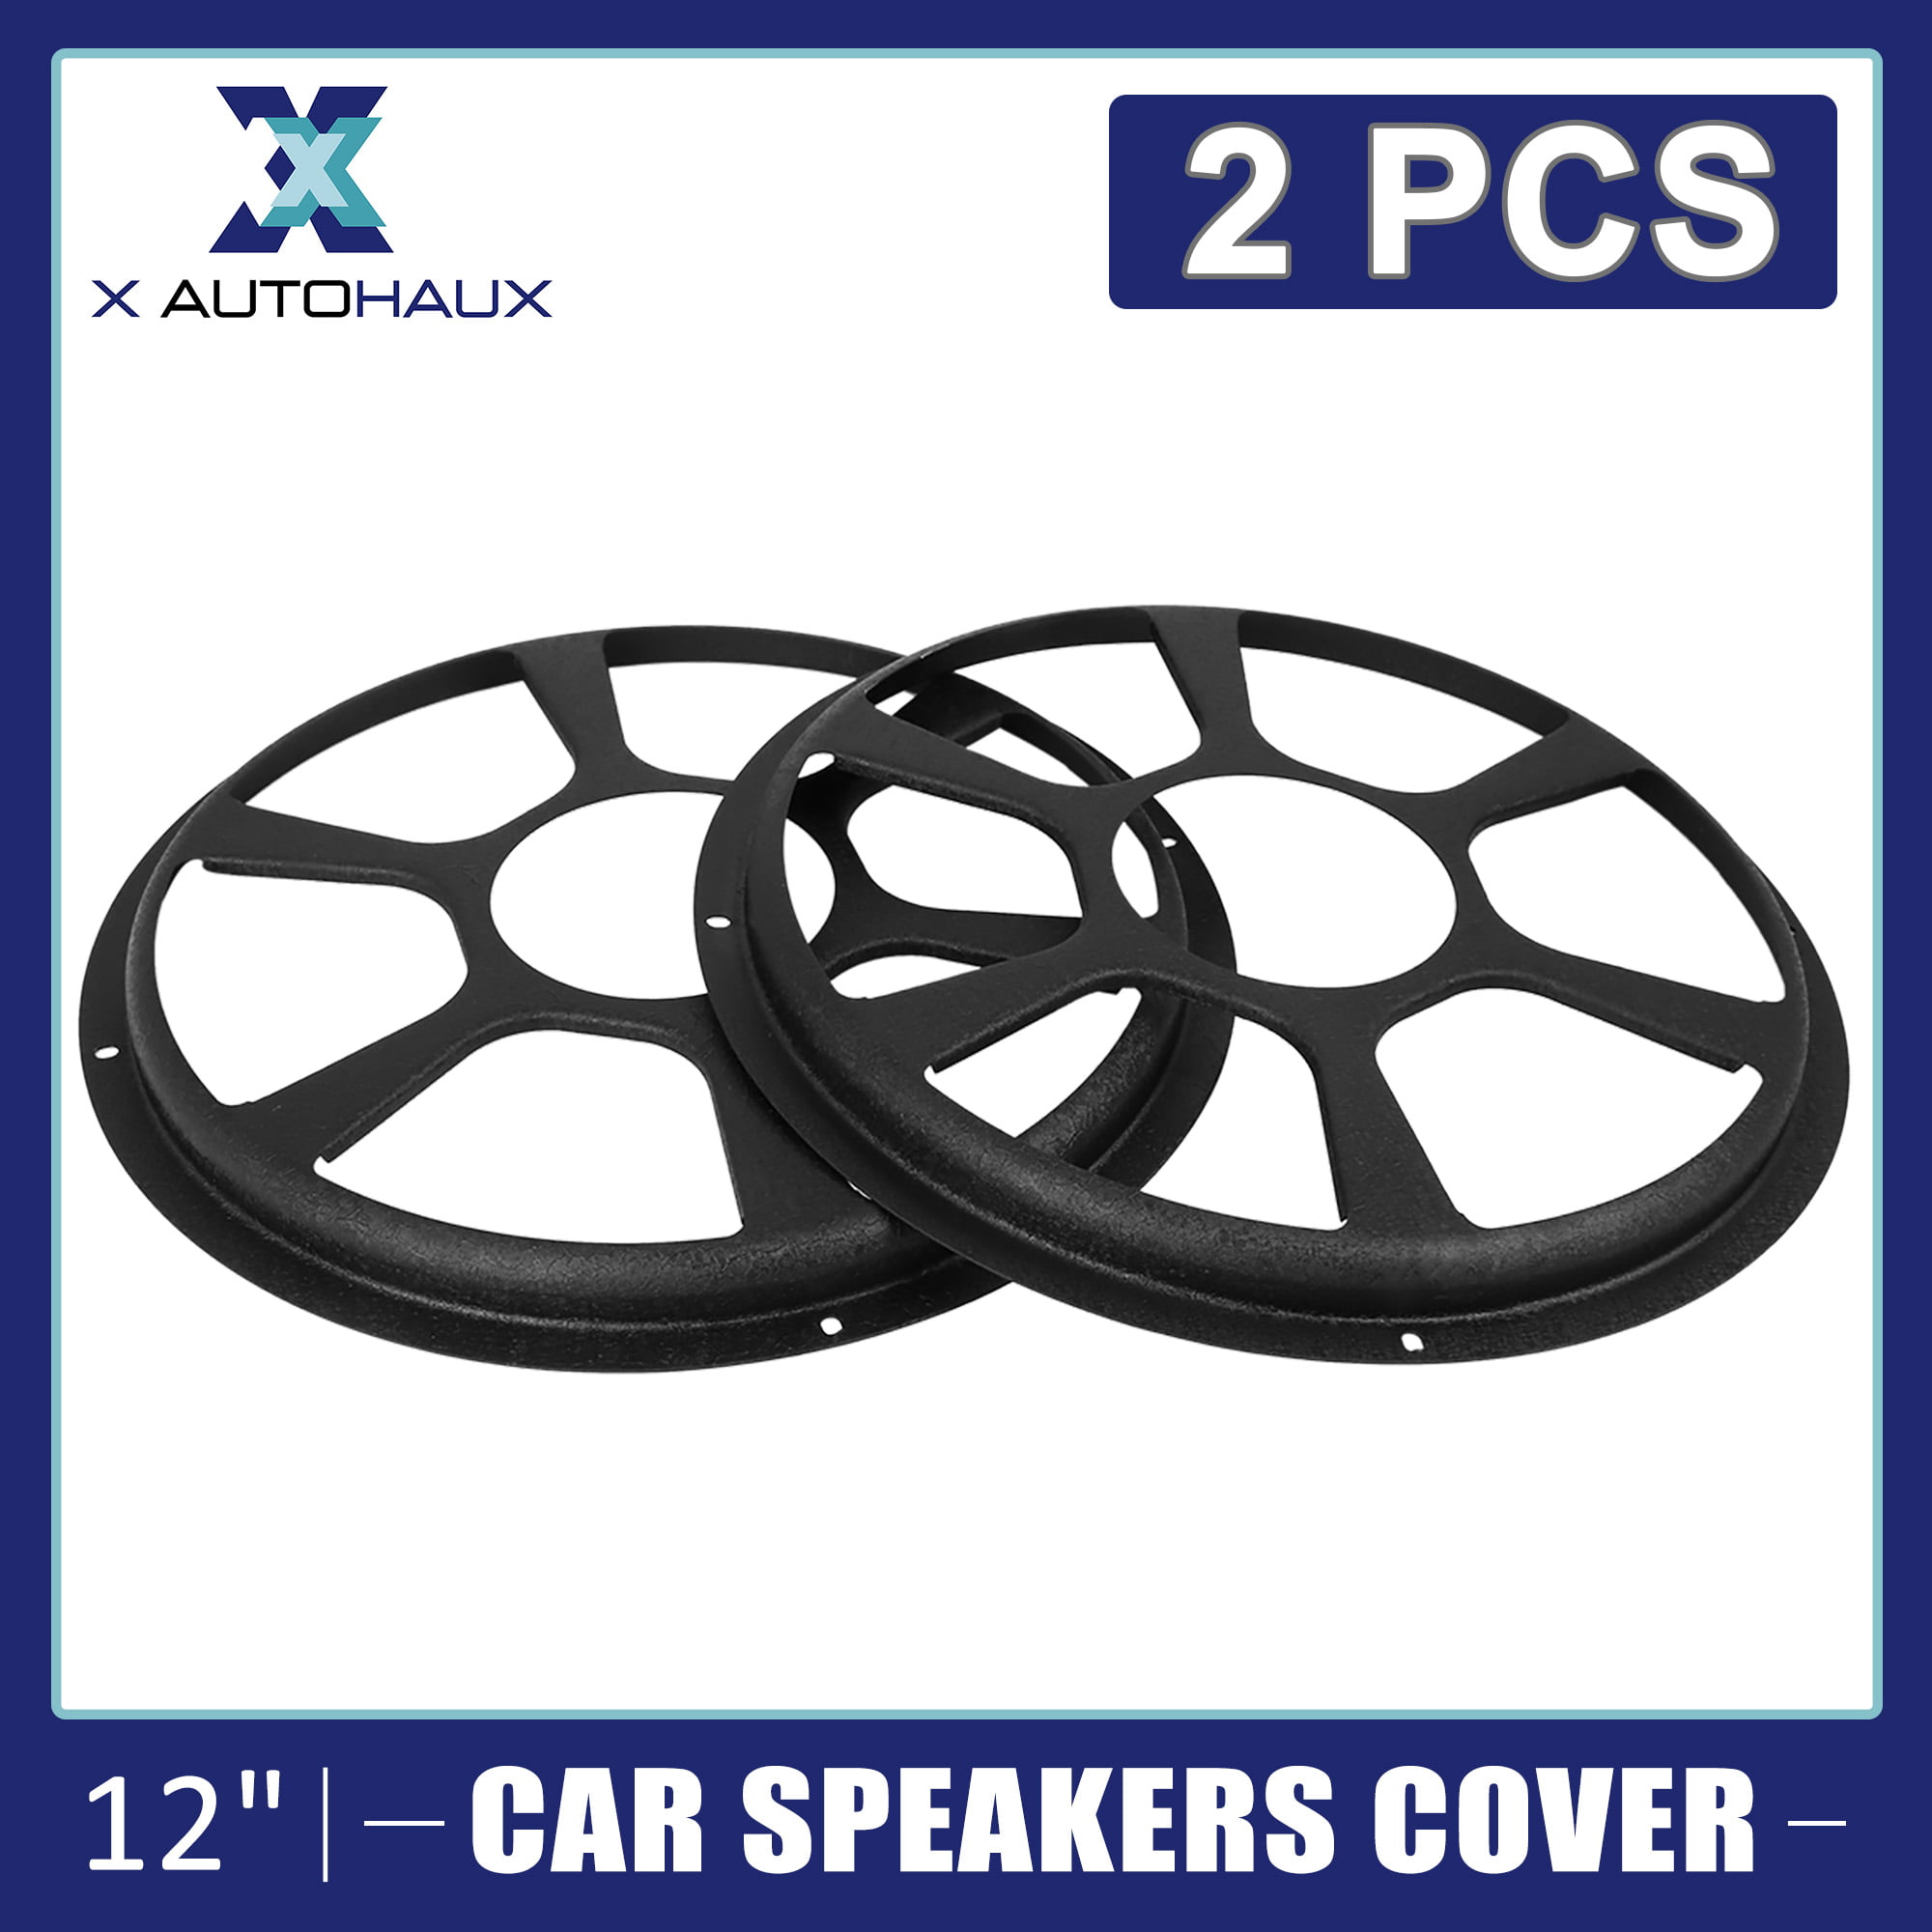 X AUTOHAUX 12 Inch Bar Grille Subwoofer Speaker Grill Cover Guard for Car 2pcs